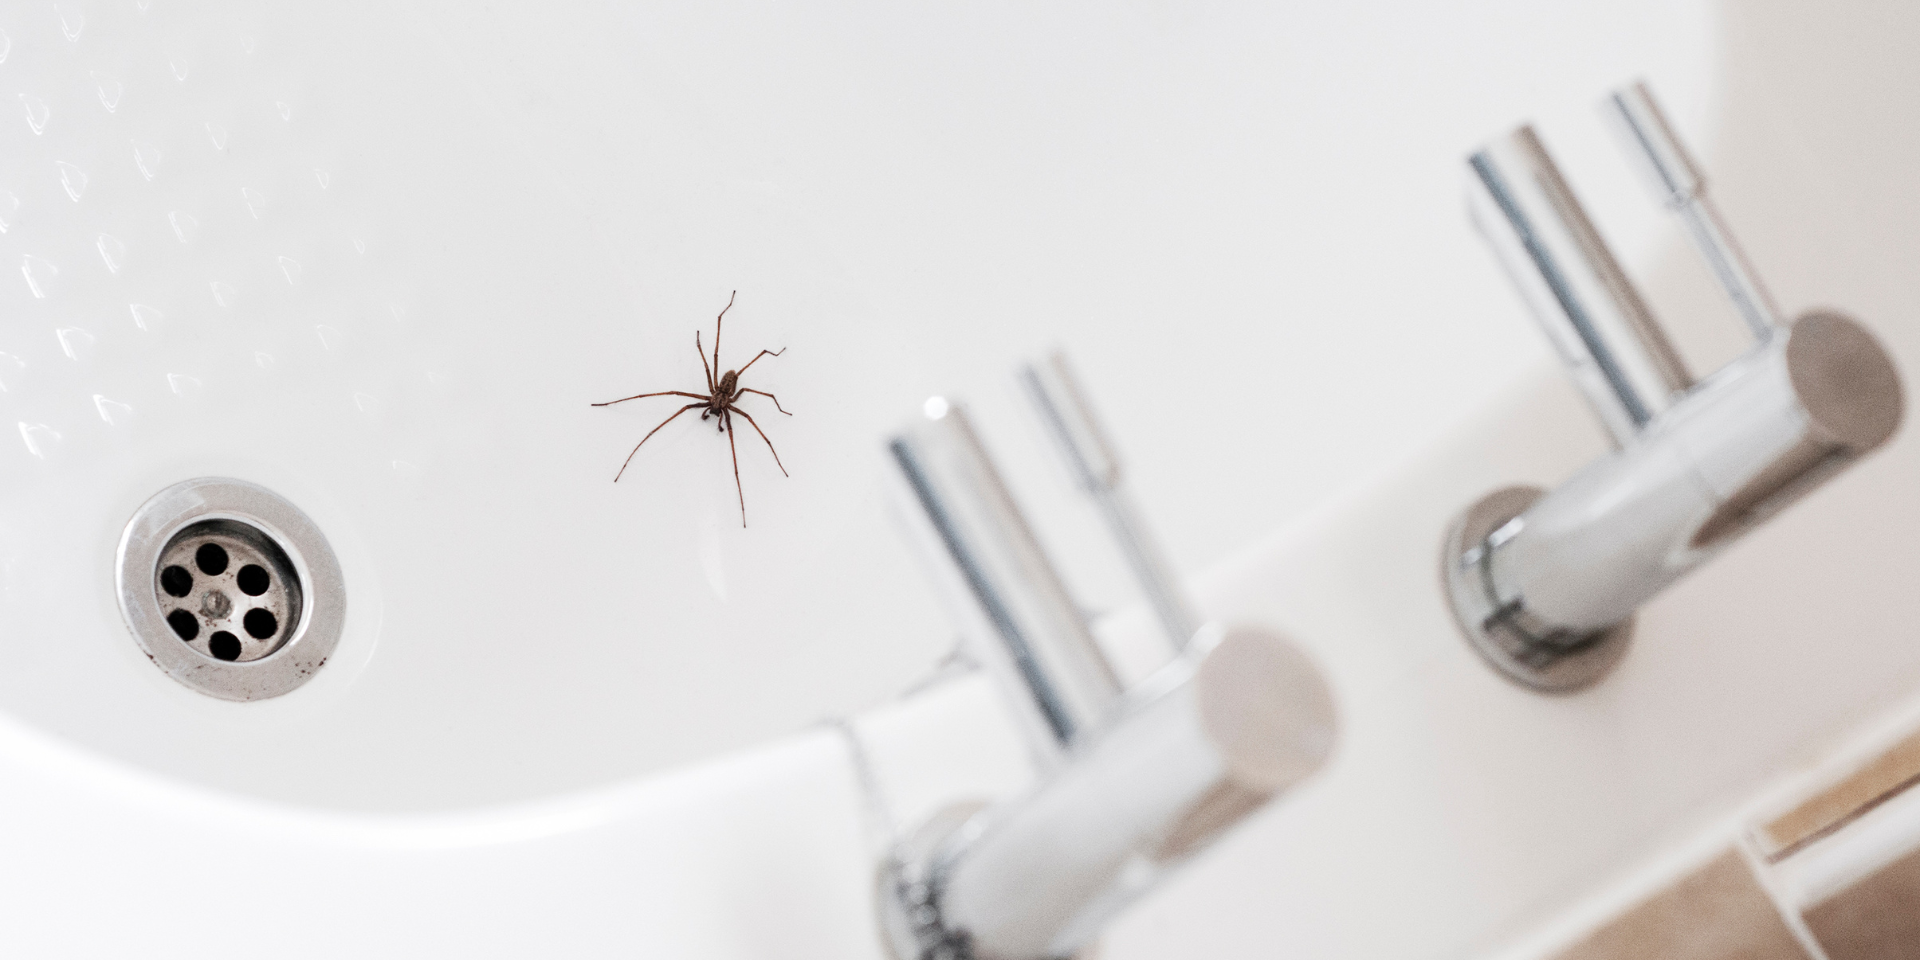 Spiders thrive in undisturbed, cluttered areas